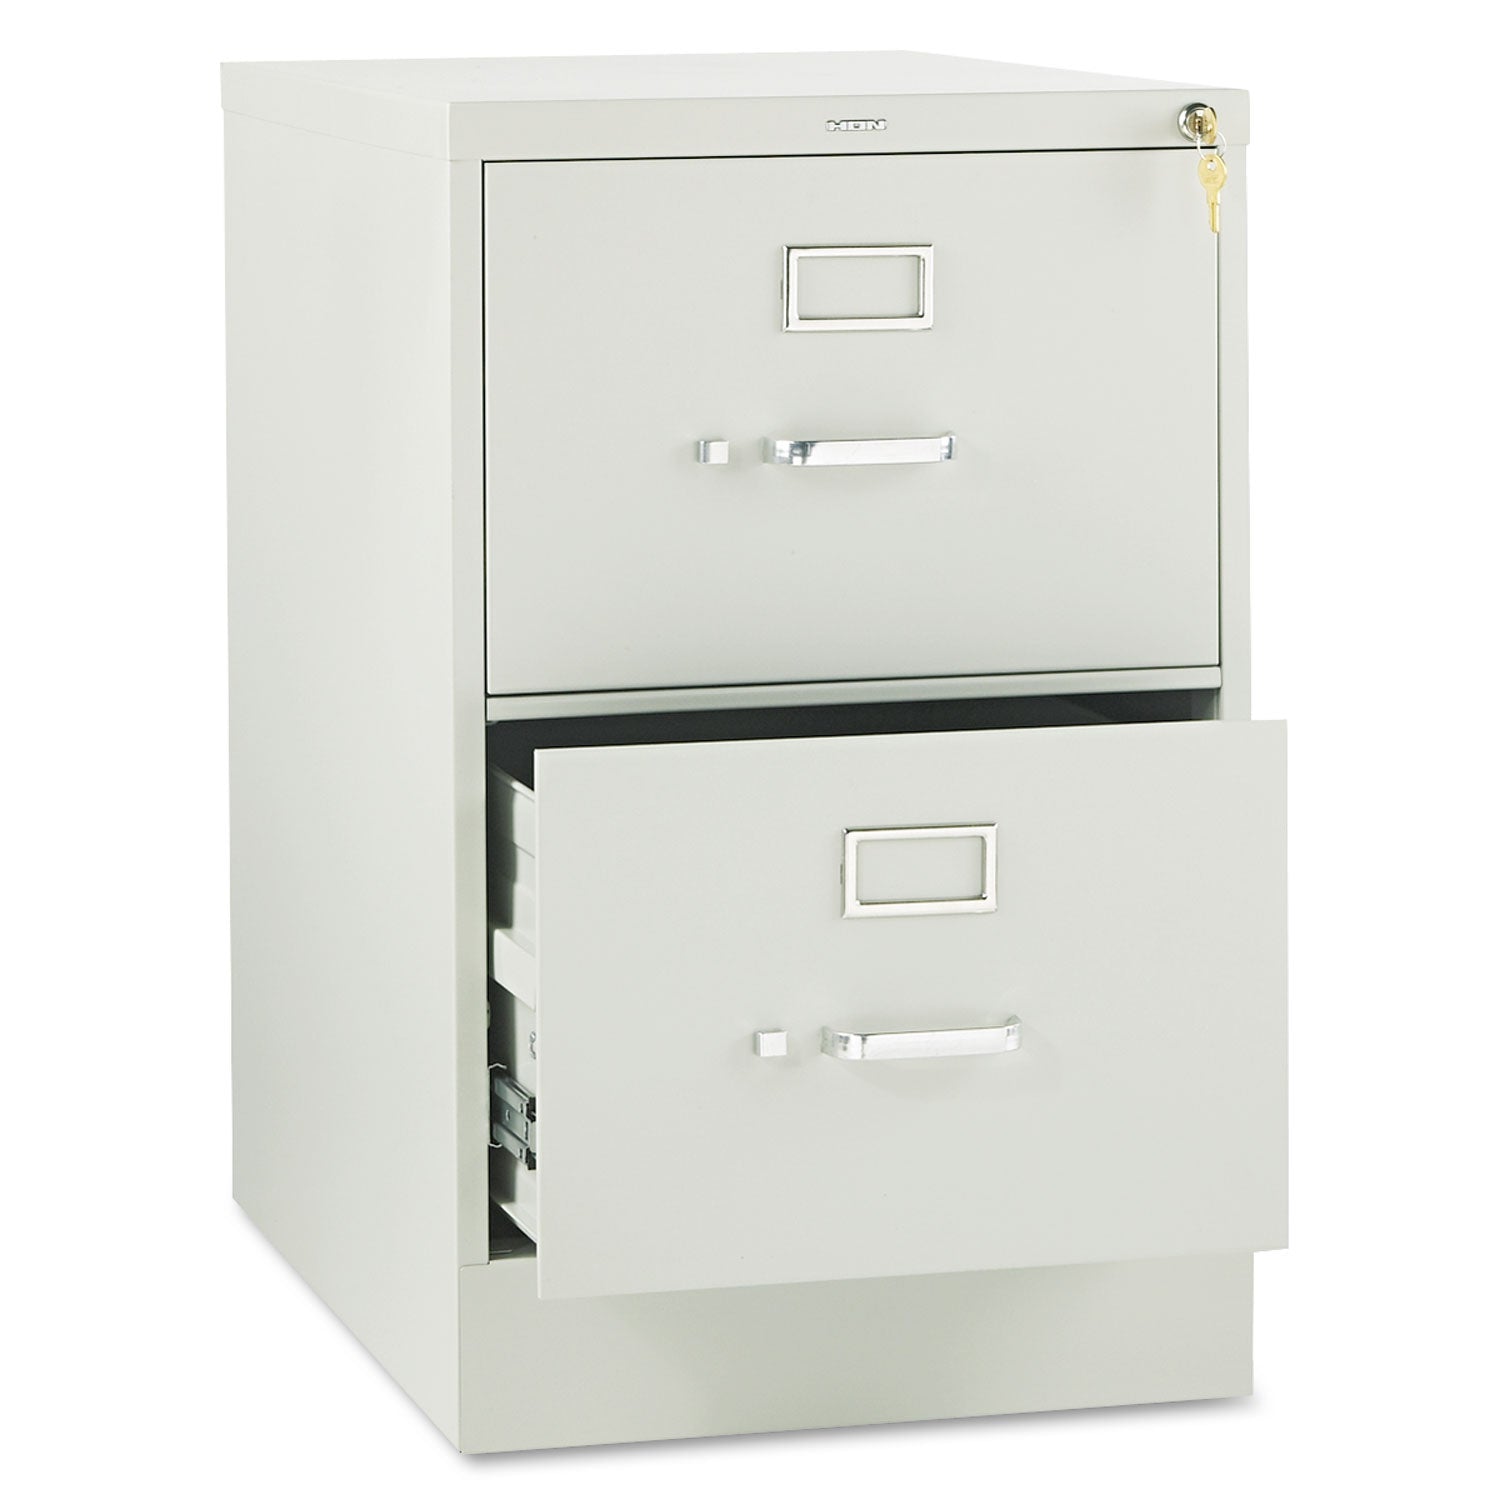 310 Series Vertical File, 2 Legal-Size File Drawers, Light Gray, 18.25" x 26.5" x 29 - 